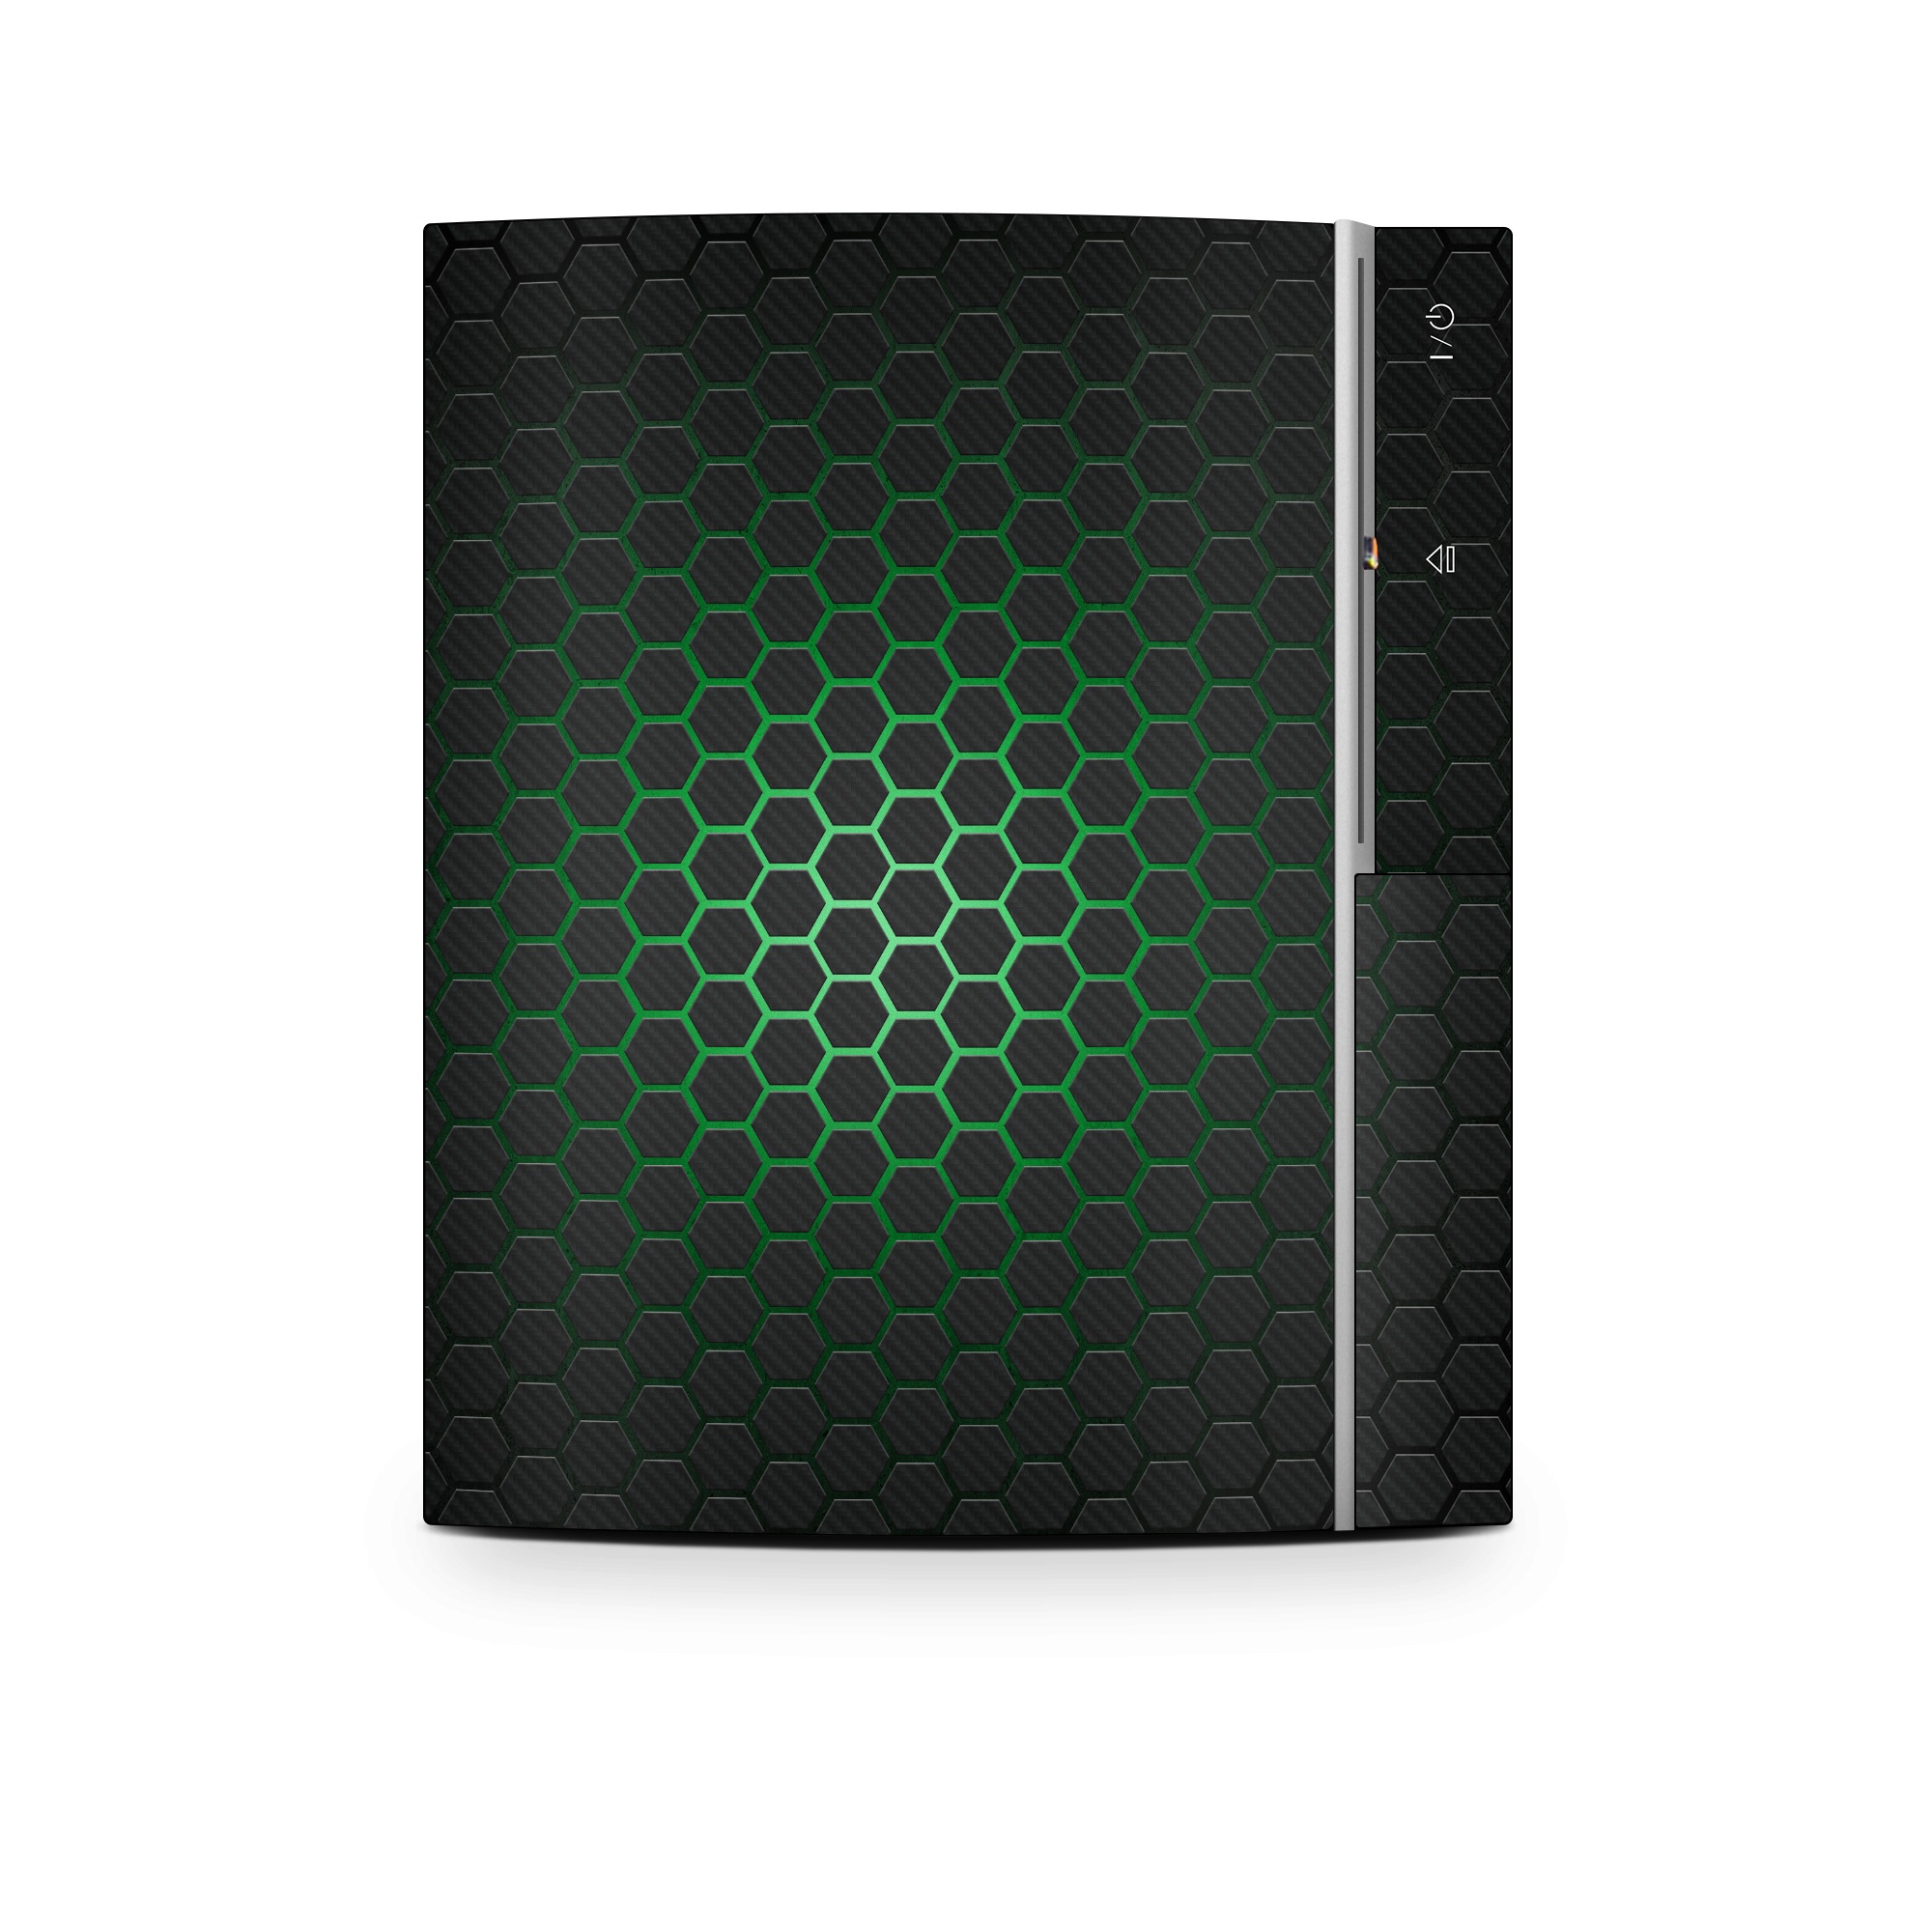 Old PS3 Skin design of Pattern, Metal, Design, Carbon, Space, Circle, with black, gray, green colors